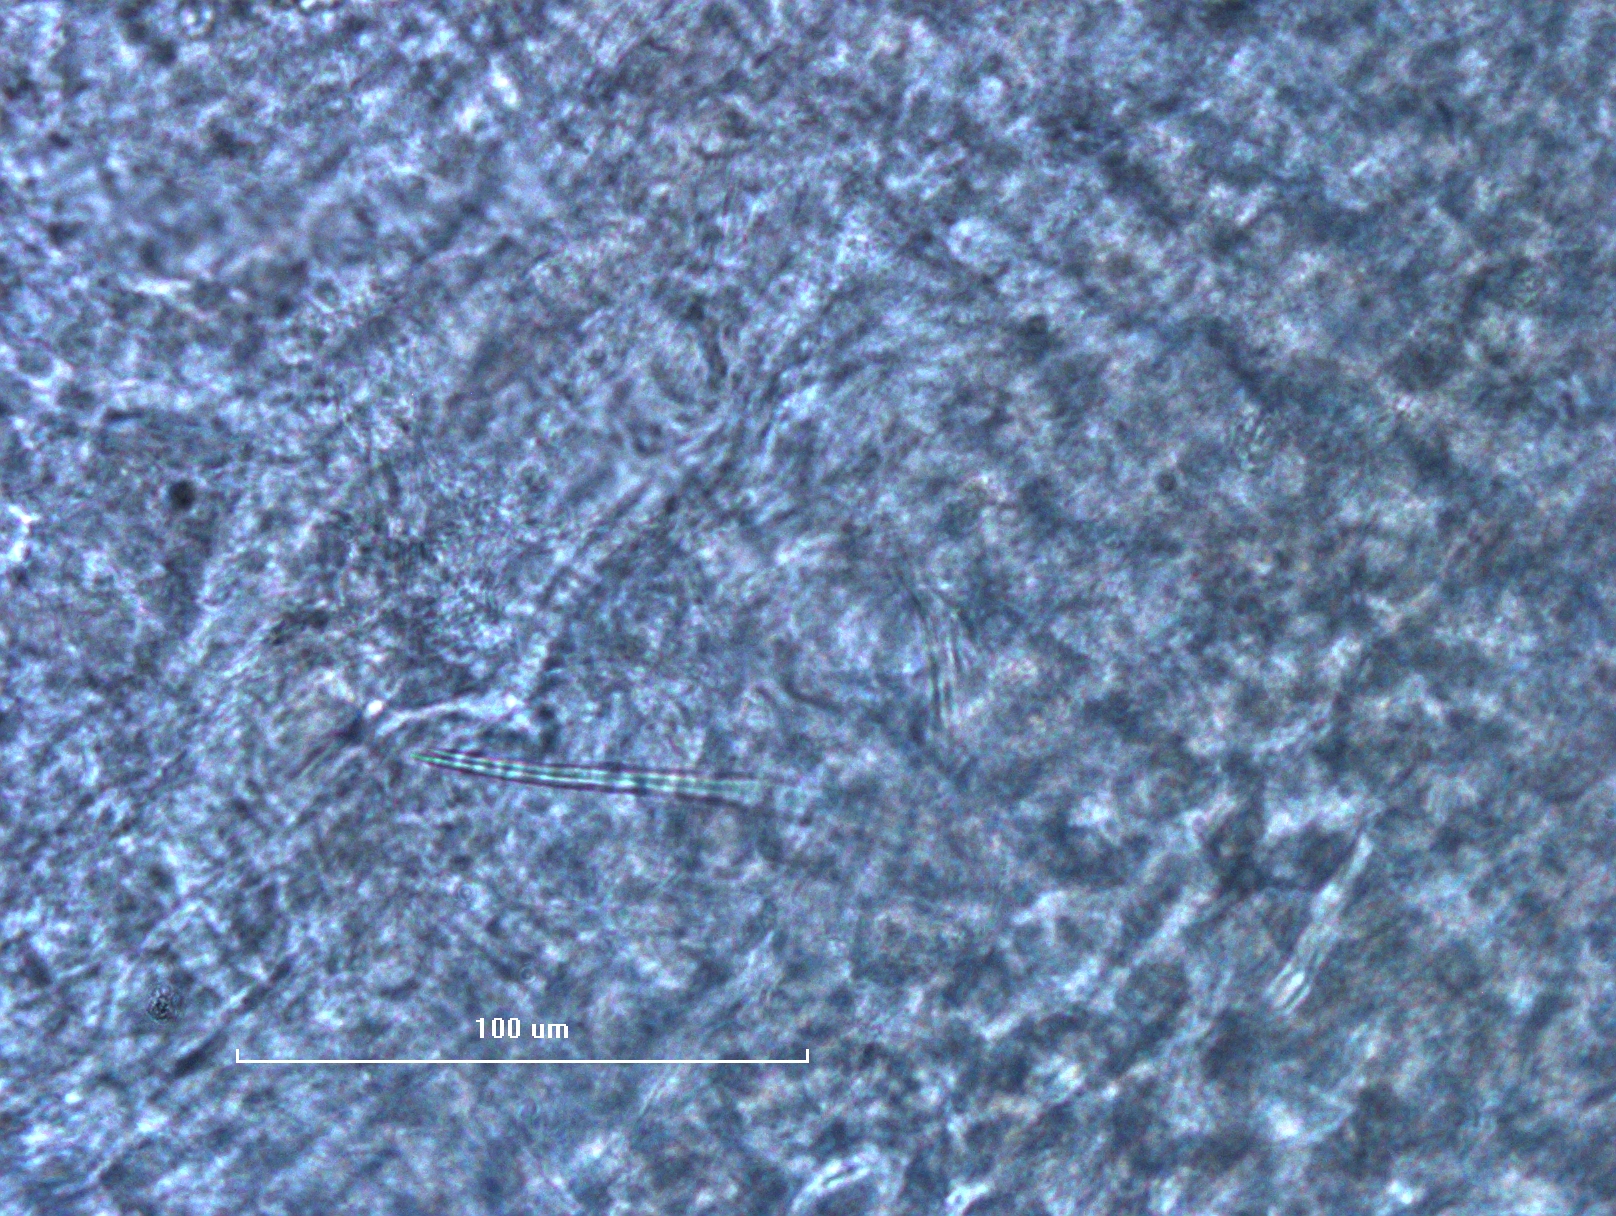 photomicrograph of the reproductive structure of a worm. The specialized chaetae is long and thin like a needle.